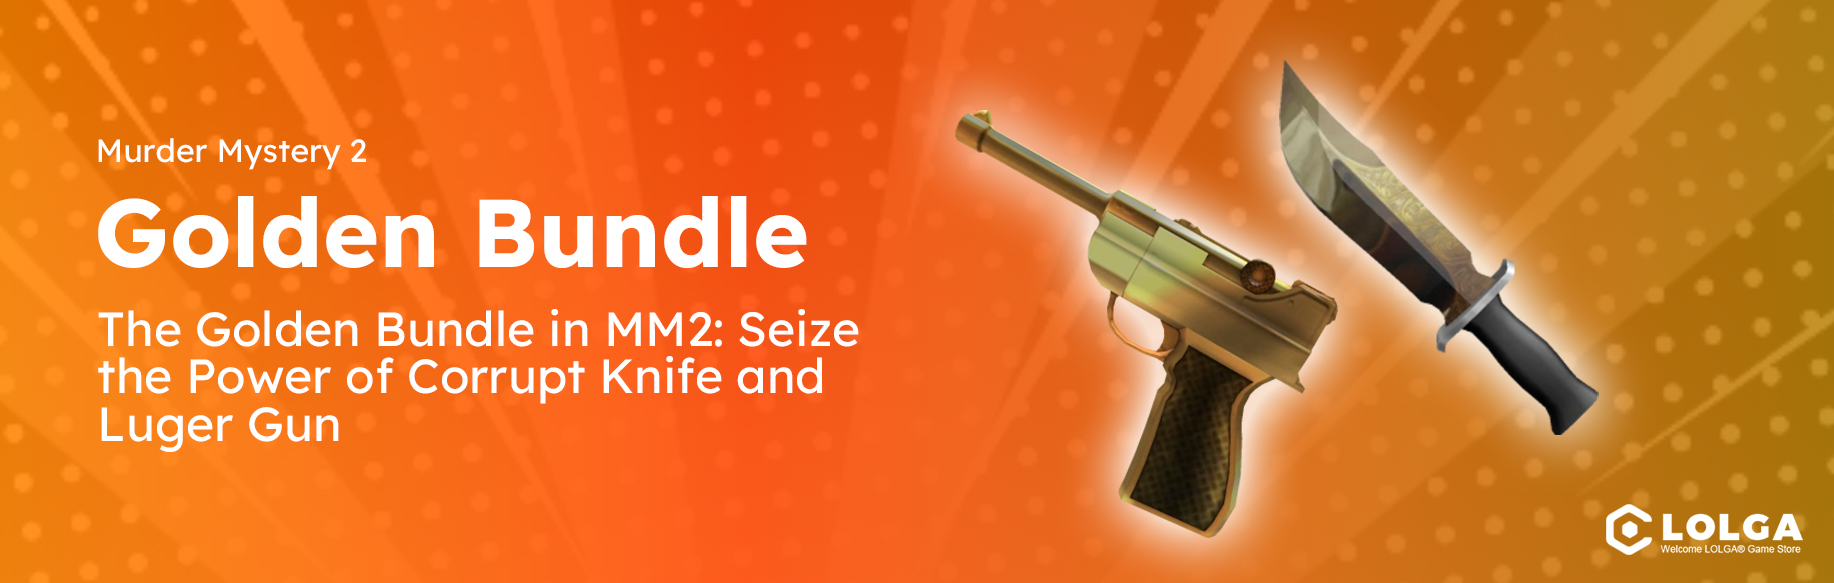 The Golden Bundle in MM2: Seize the Power of Corrupt Knife and Luger Gun